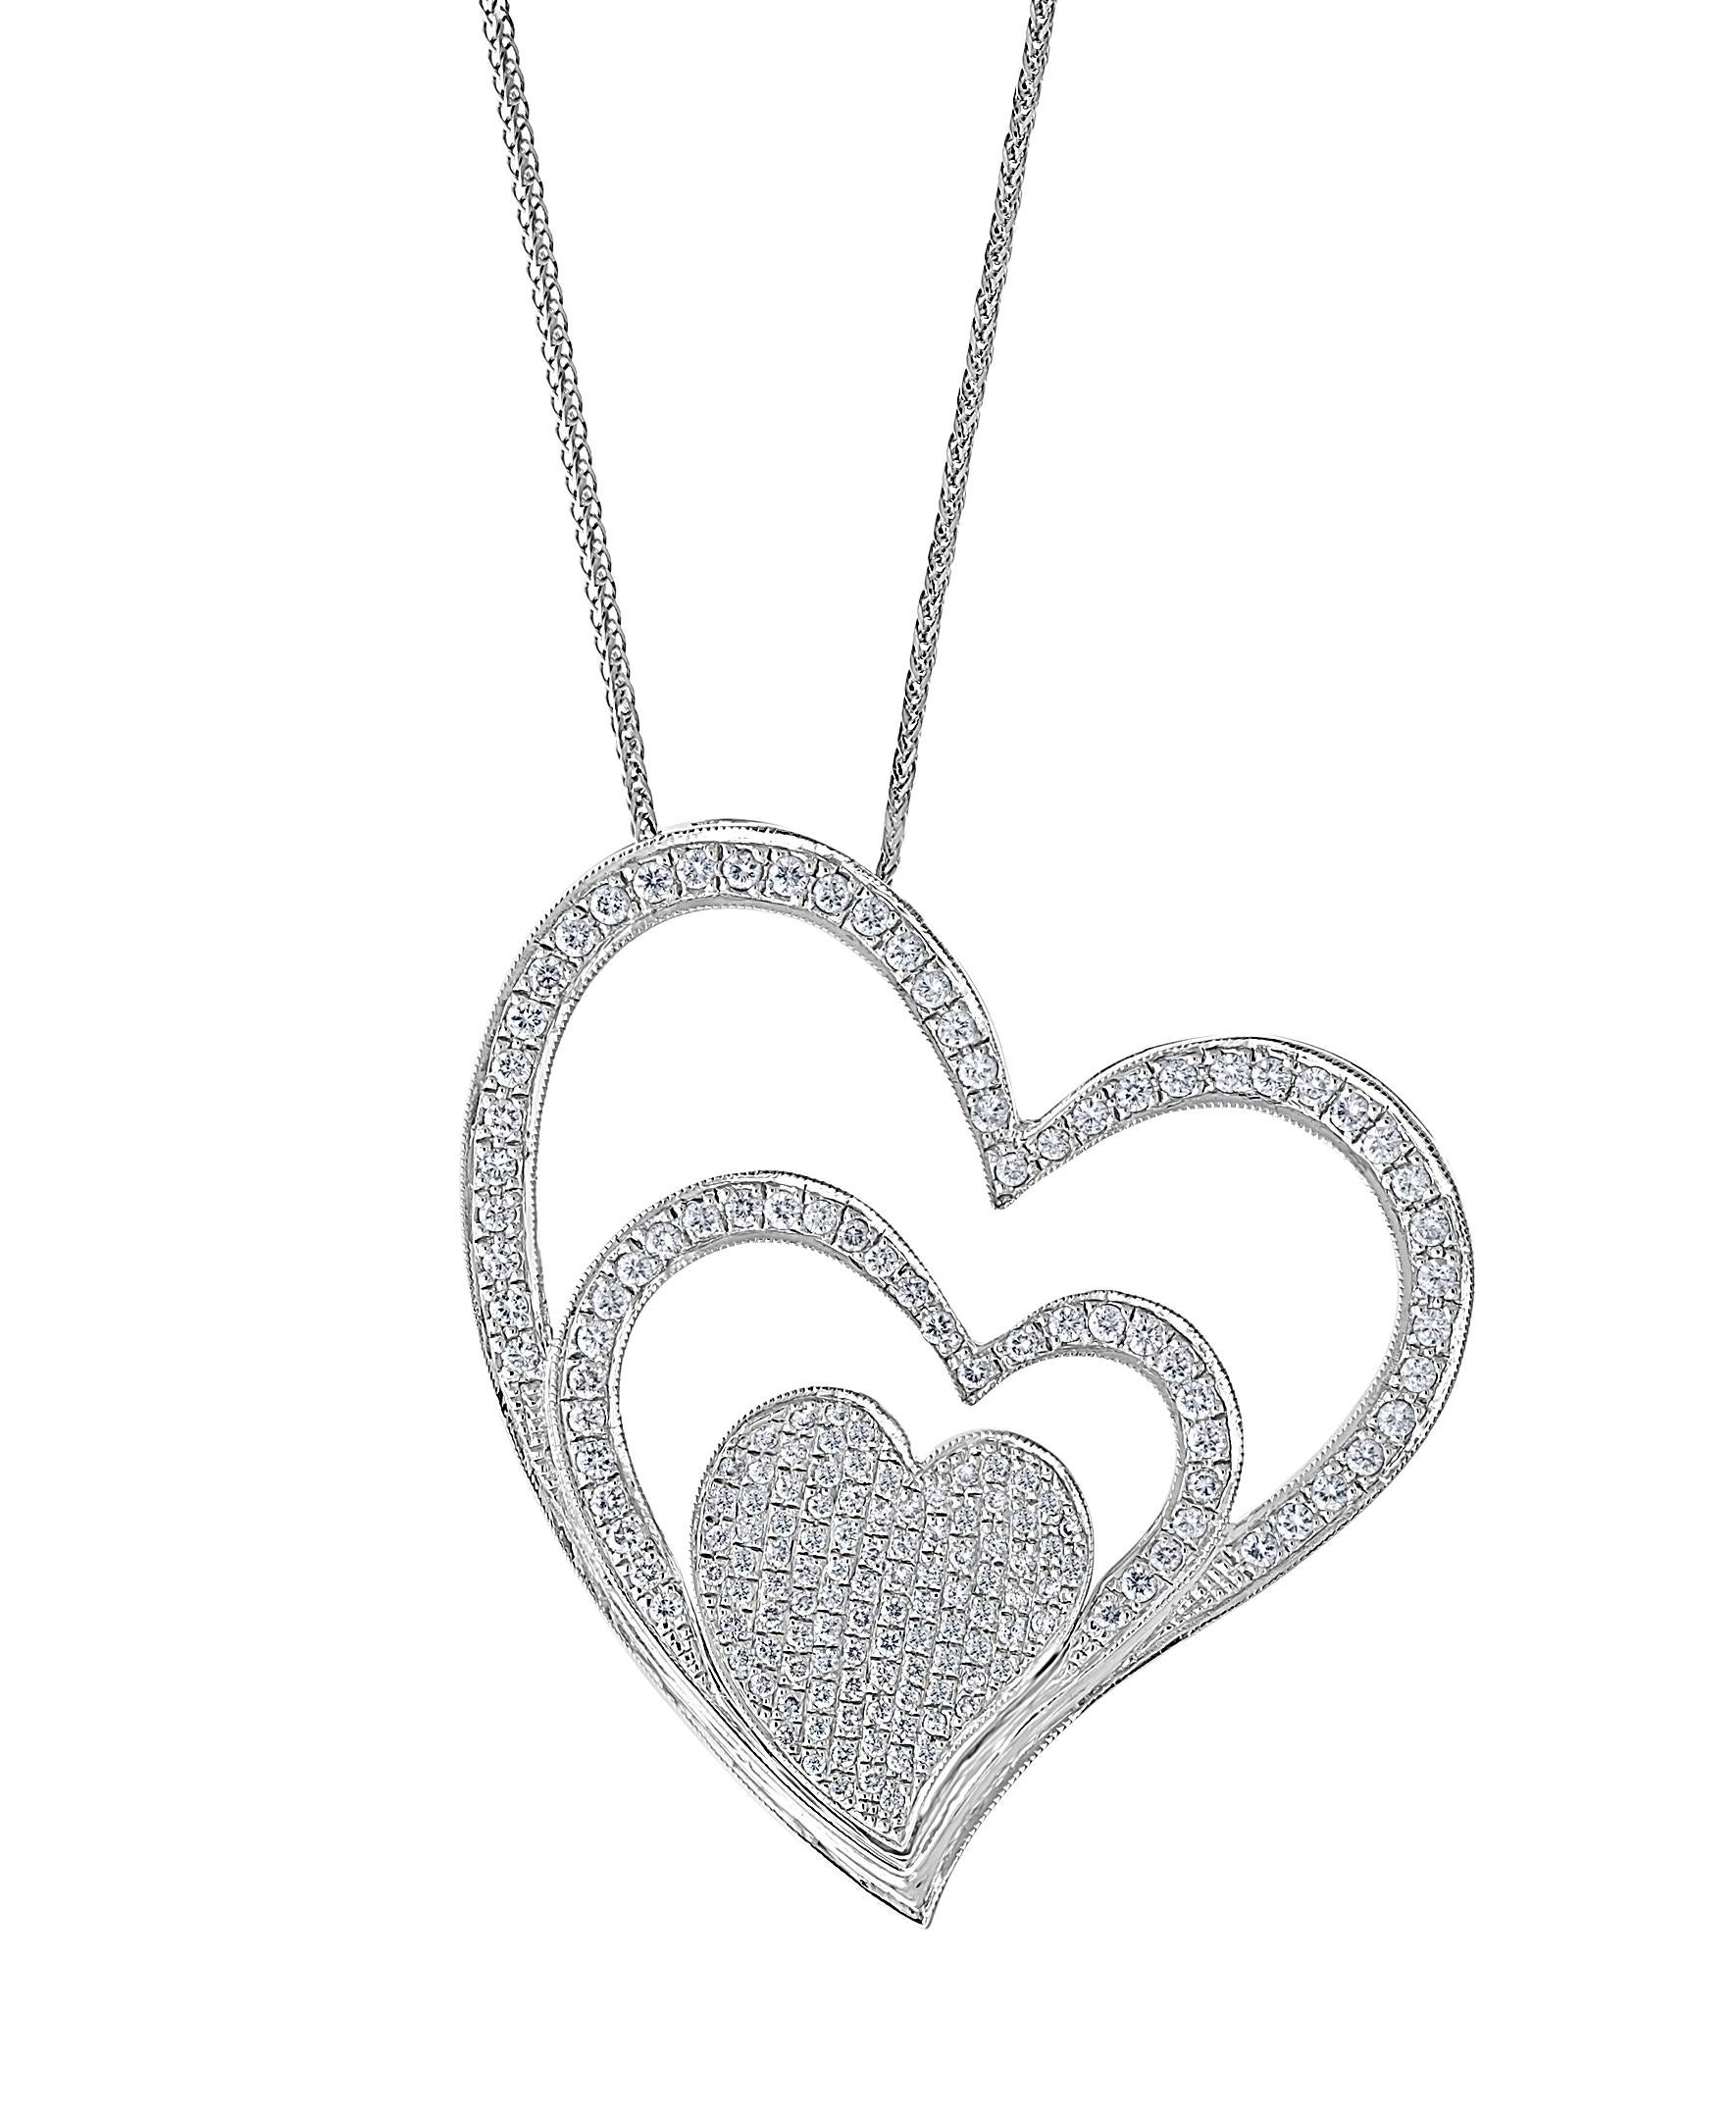 3.6 Ct Diamond  Heart Pendant/ Necklace 18 Karat White Gold With 14 K Gold Chain
Diamond Weight  approximately 3.6 Carats
Diamonds are VS quality. Lots of shine and Bling 

18 K gold Weight  10 Grams
Very affordable price for this particular